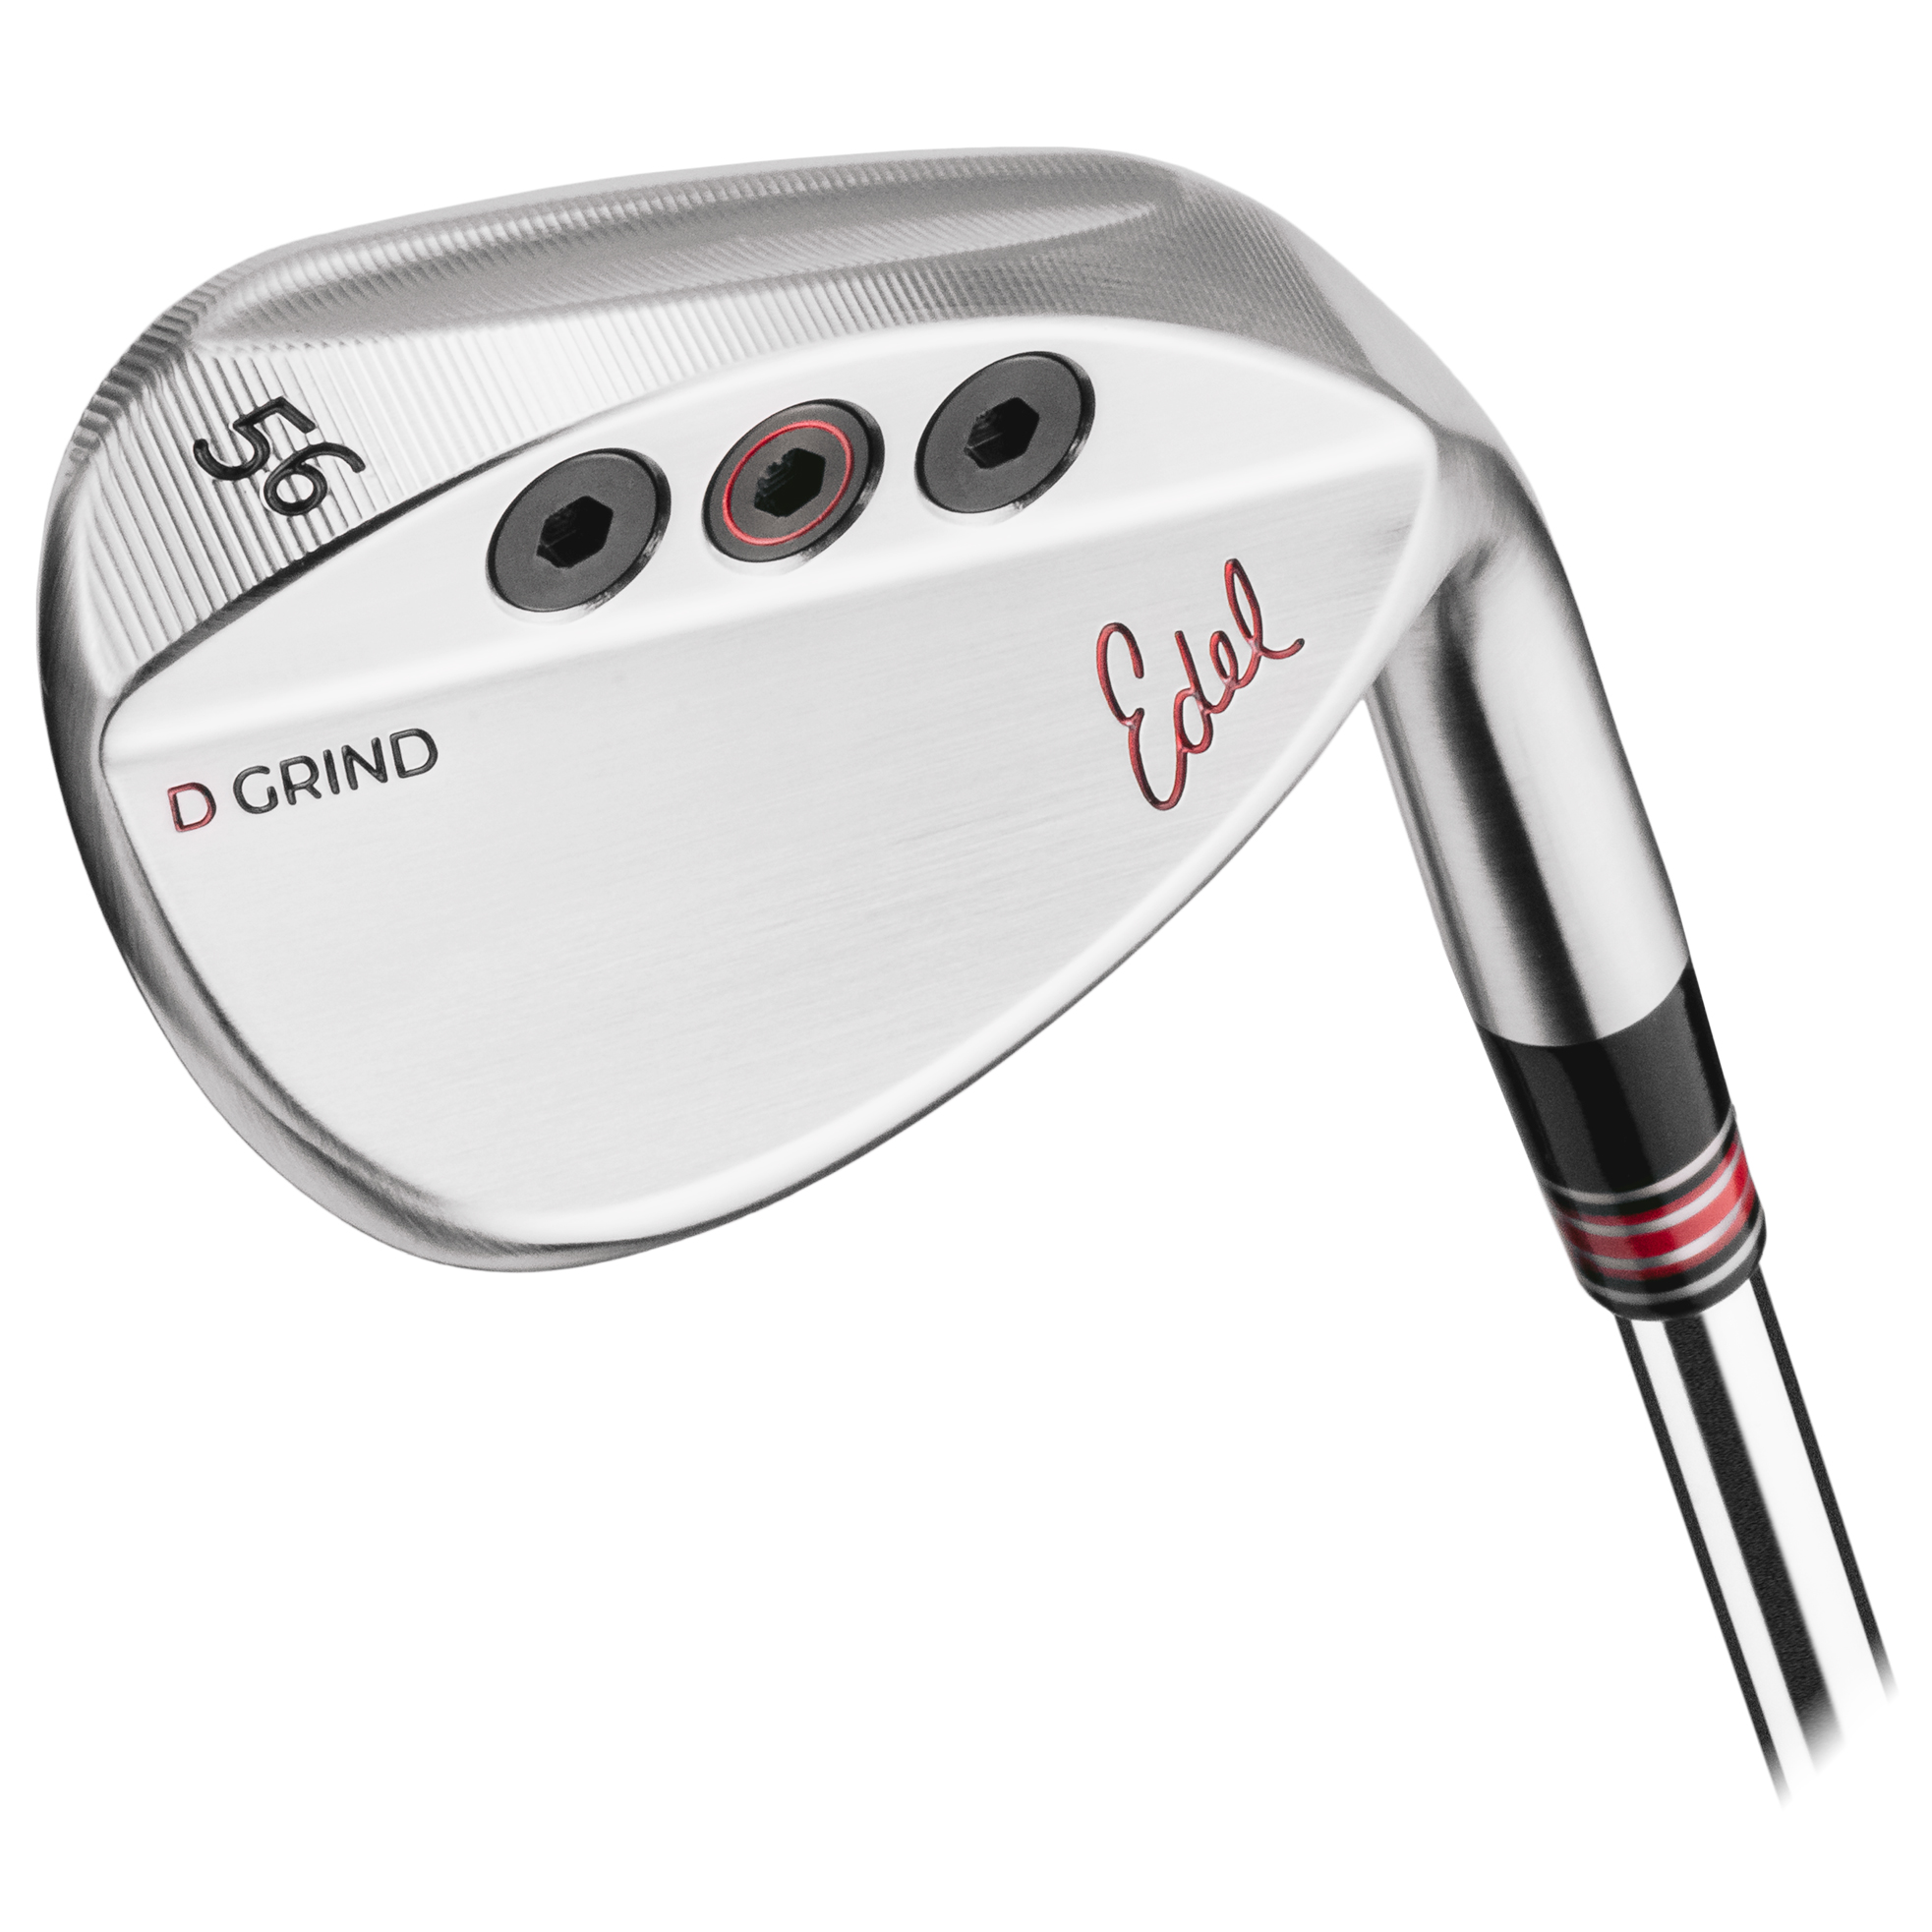 Edel SMS wedge uses movable weight to match swing to club | Golf